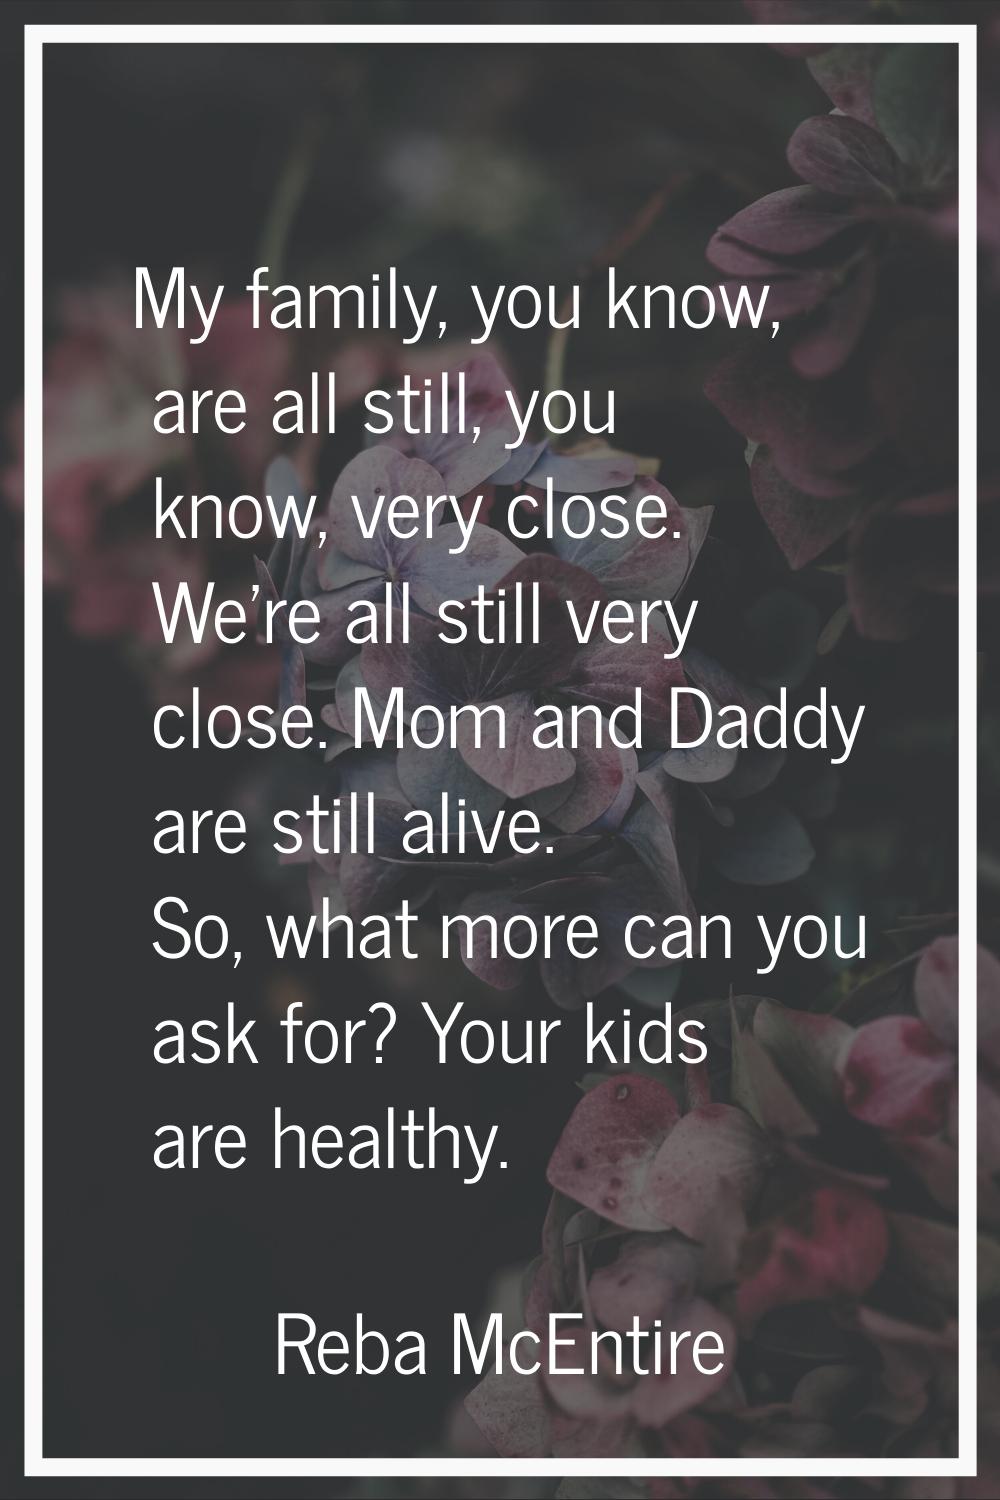 My family, you know, are all still, you know, very close. We're all still very close. Mom and Daddy